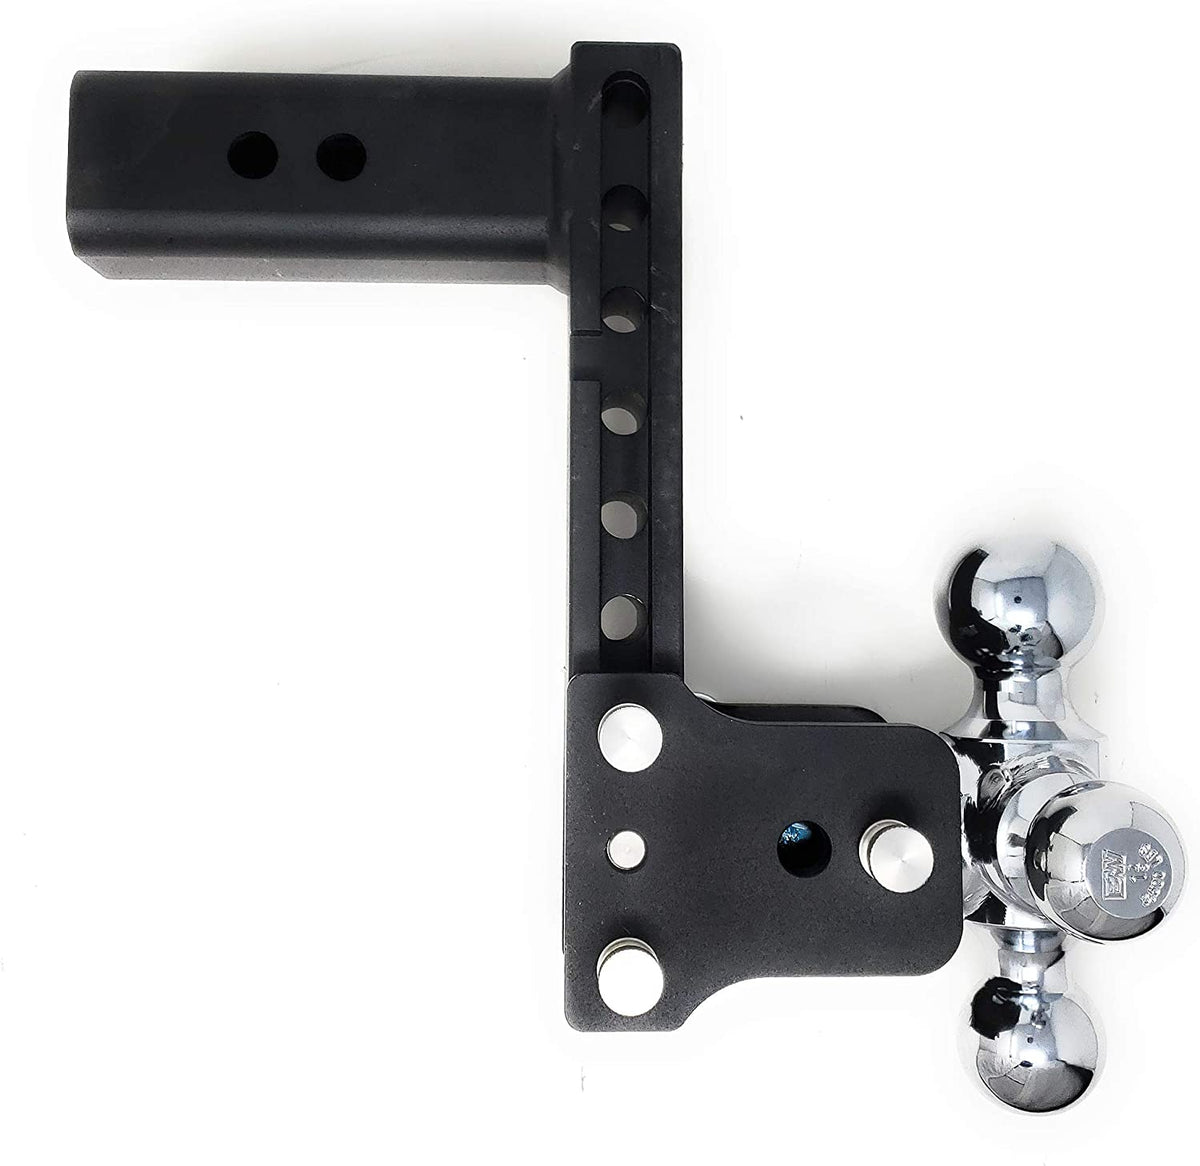 B&W Trailer Hitches Tow & Stow Adjustable Trailer Hitch Ball Mount